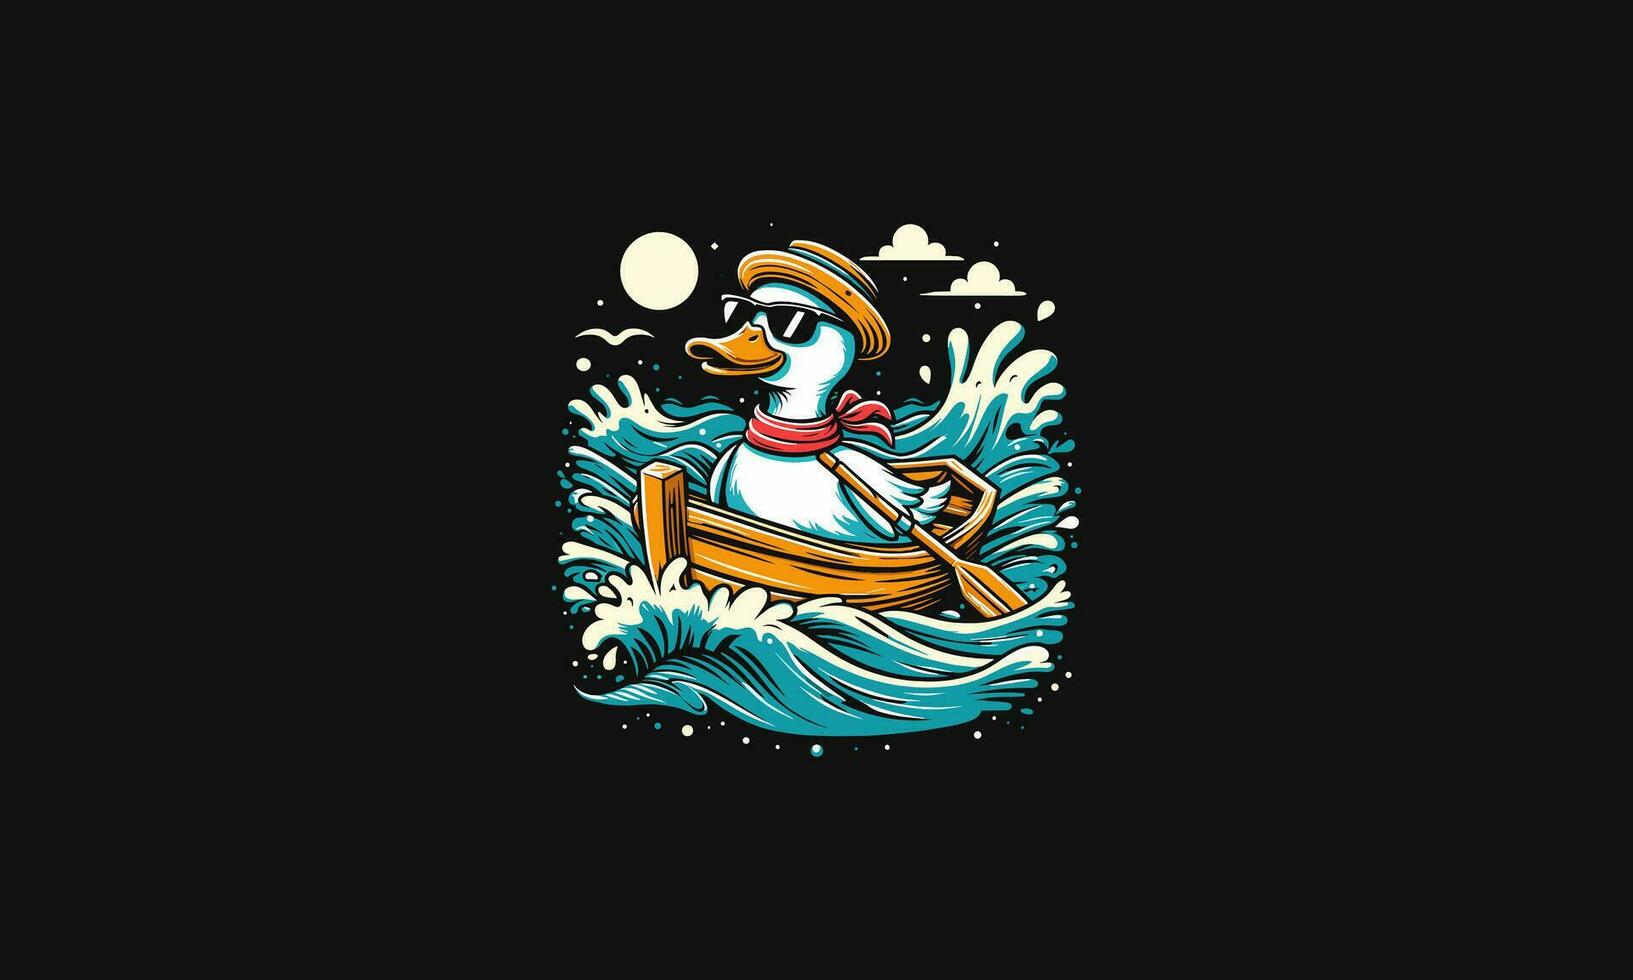 duck wearing hat riding boat on sea vector artwork design